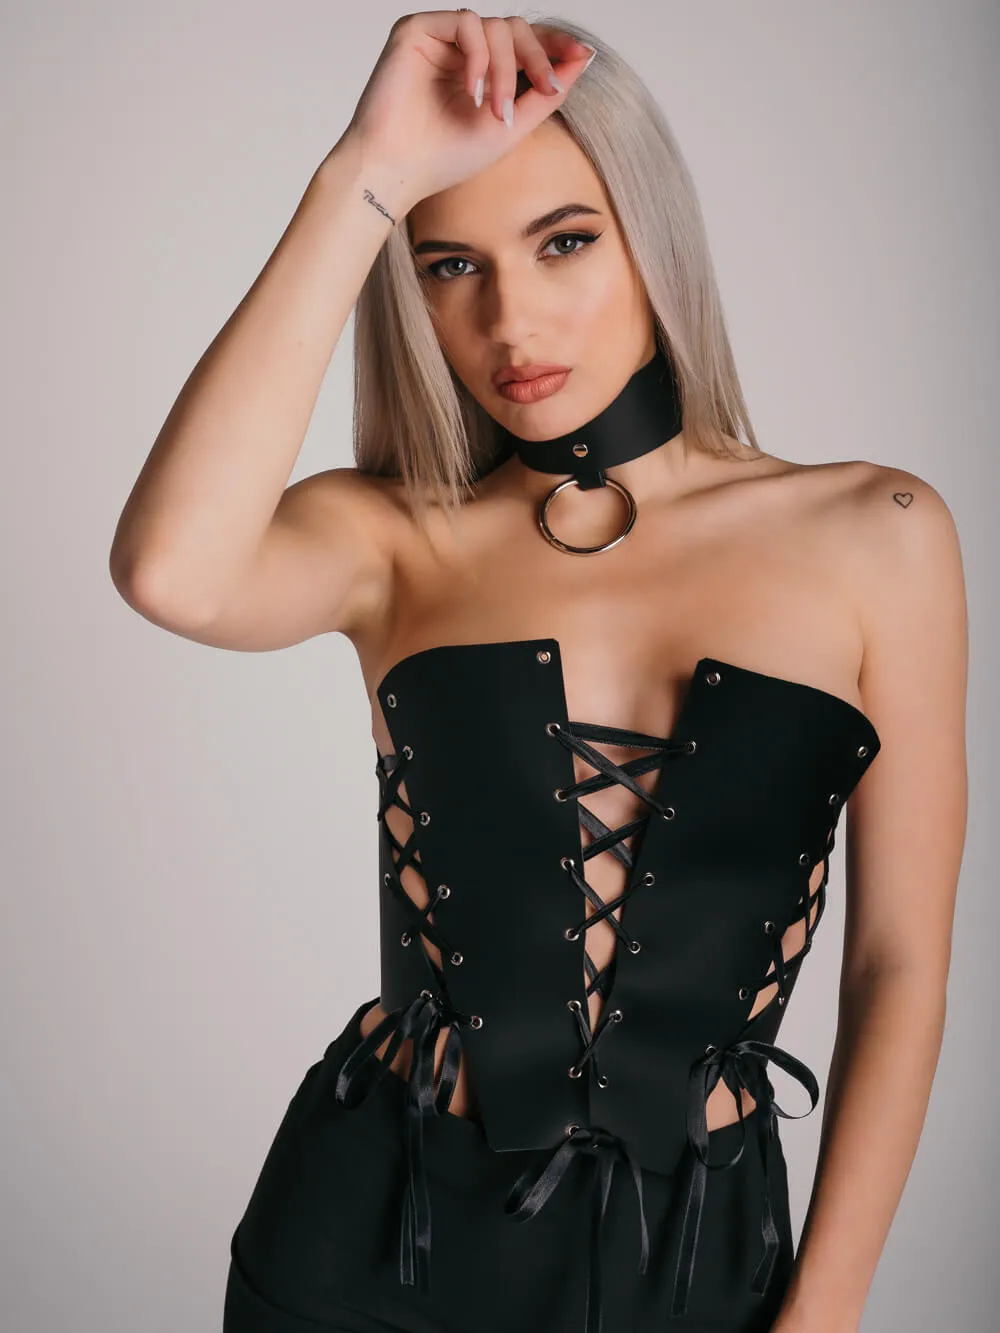 Wide black leather choker with large silver ring and massive leather corset with satin laces.